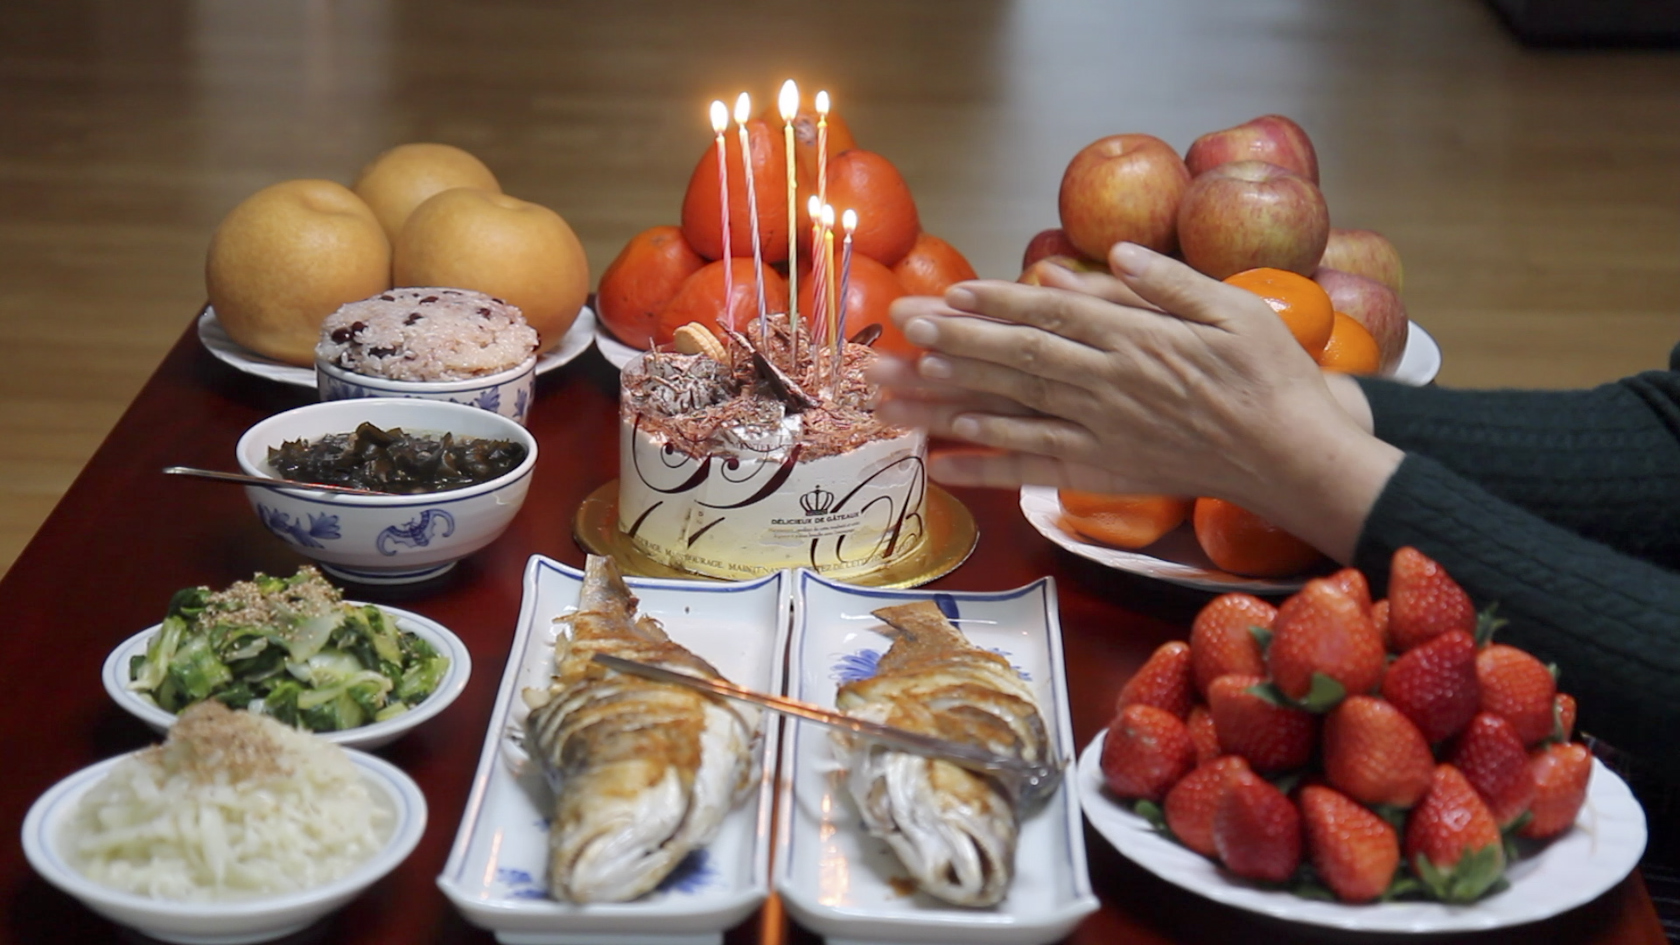 This is a photograph of a Korean dining table set with a small, fancy birthday cake with tall candles. Around the cake are plates piled high with strawberries, oranges, apples, persimmons and Korean pears. There are also two gilled fish and smaller bowls of rice, green vegetables, and black beans. From the right side of the frame, someone holds their hands in a gesture of prayer over the meal.